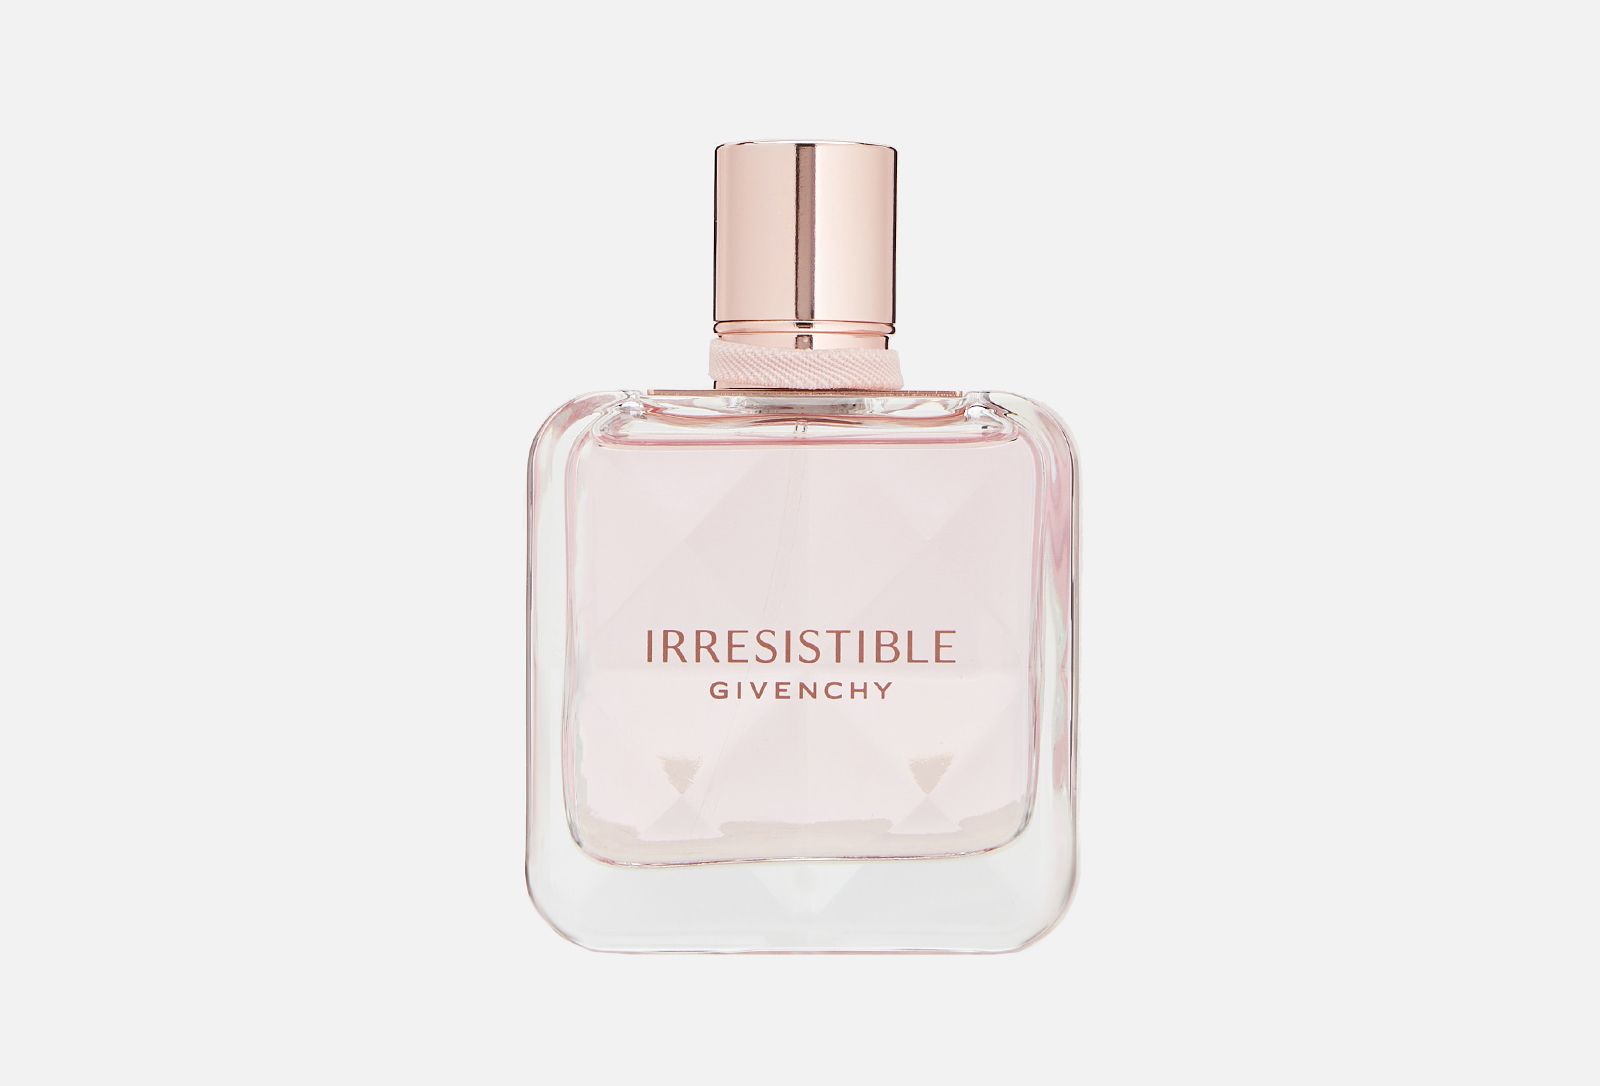 Givenchy irresistible toilette. Givenchy irresistible 80 мл. Givenchy irresistible Fraiche. Givenchy irresistible Eau de Toilette Fraiche. Givenchy irresistible Eau.